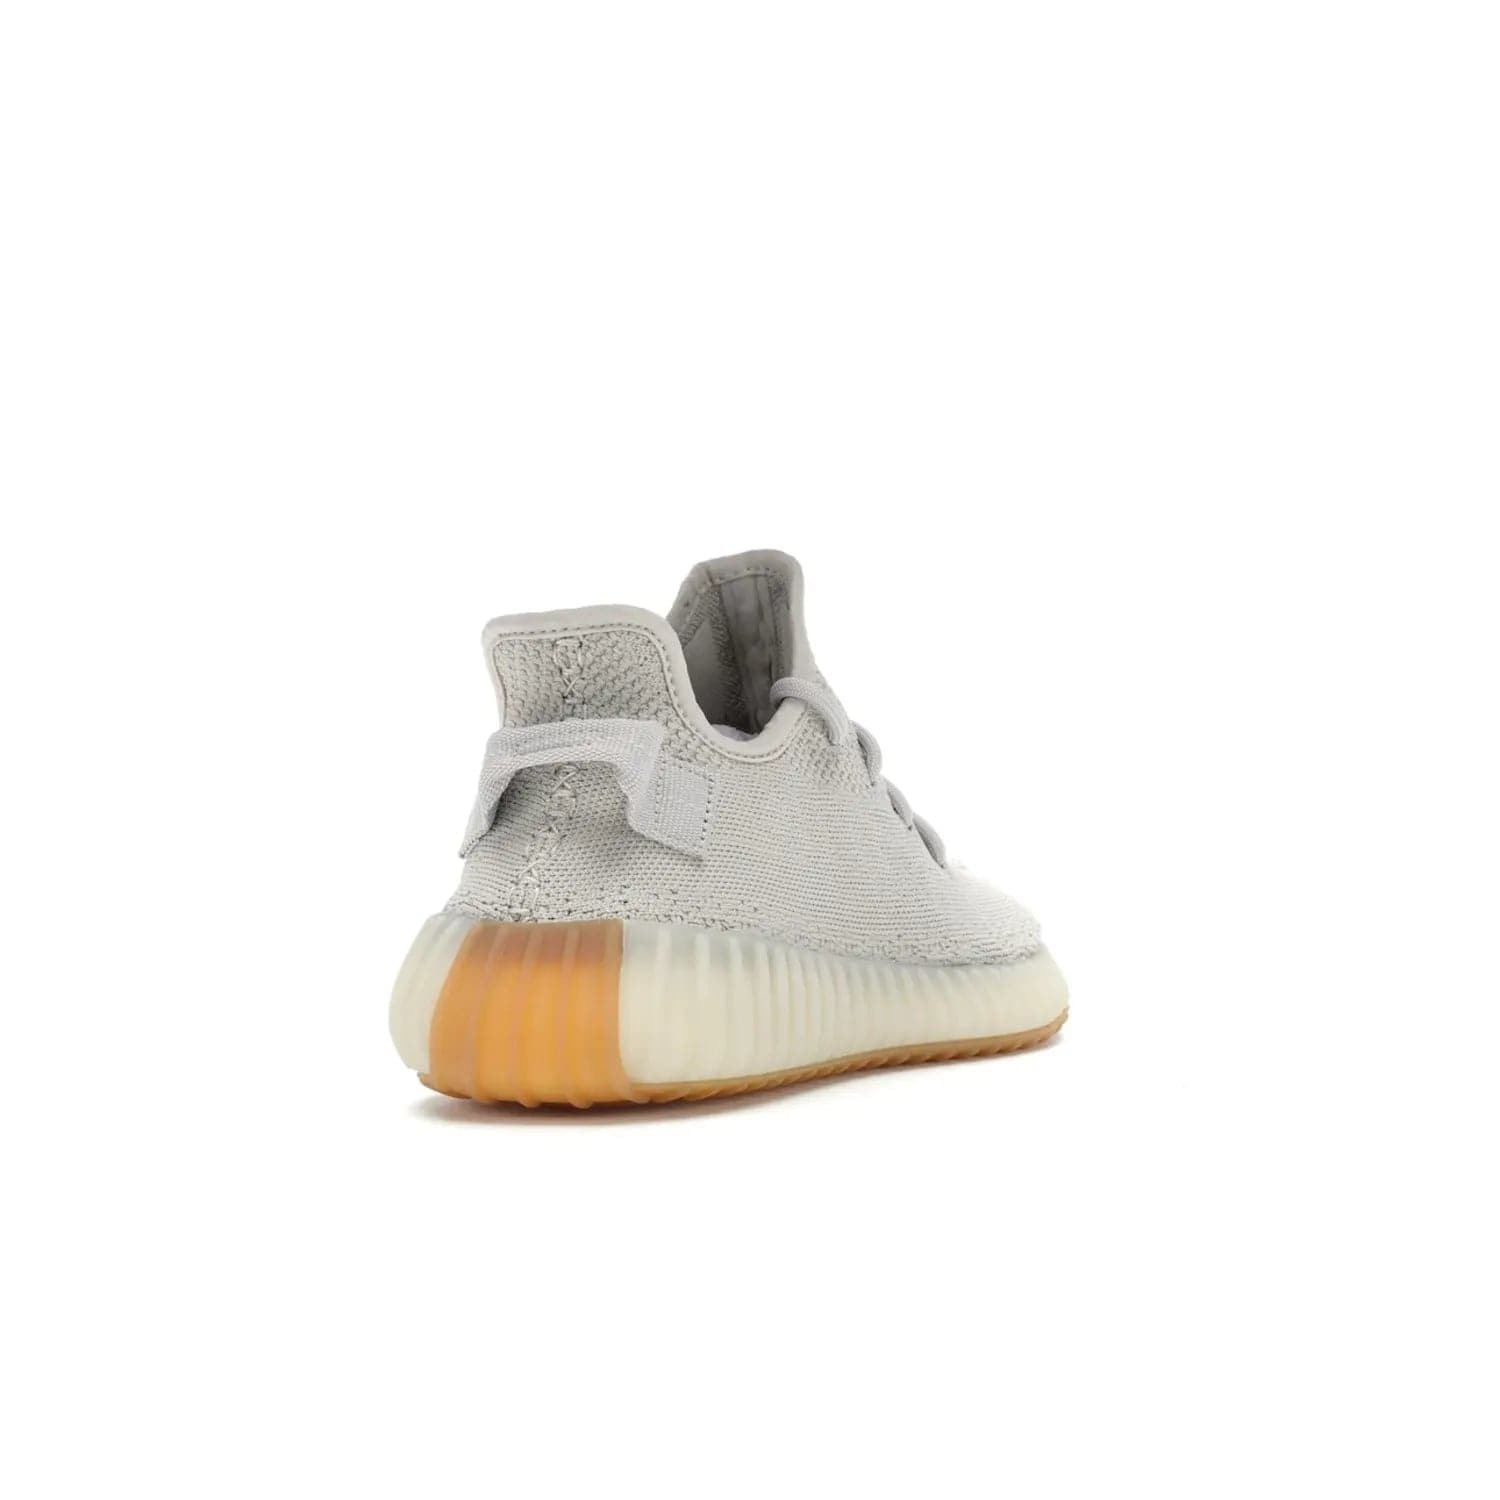 adidas Yeezy Boost 350 V2 Sesame - Image 31 - Only at www.BallersClubKickz.com - Introducing the adidas Yeezy Boost 350 V2 Sesame. Featuring a sesame upper, midsole and gum sole for a sleek silhouette. Cop the stylish sneaker released in November 2018.